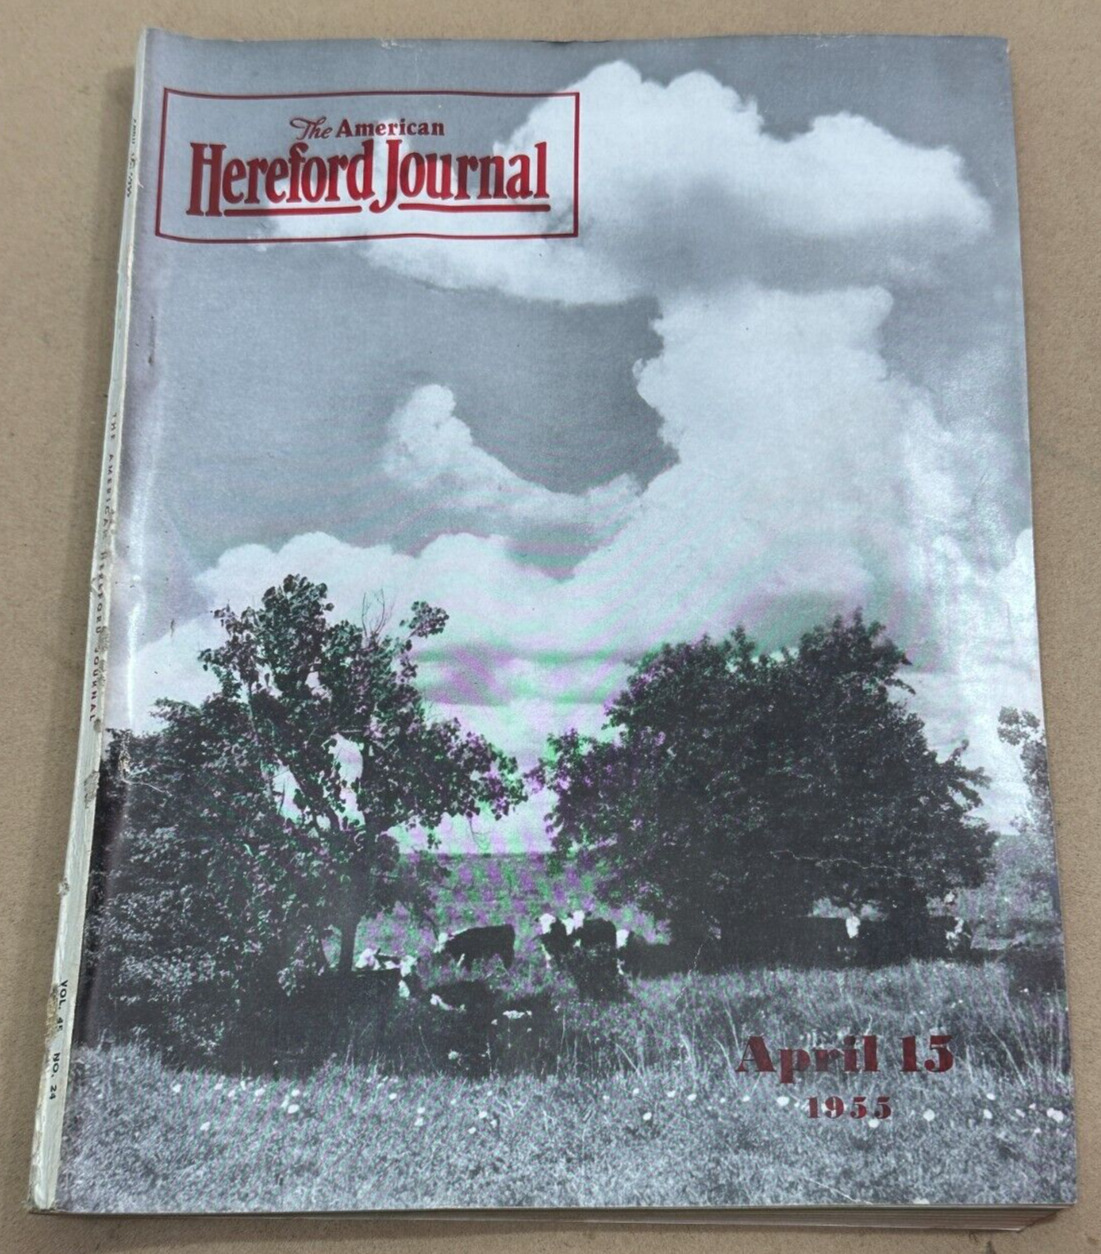 April 15, 1955 American Hereford Journal magazine - ads, articles, photos, etc